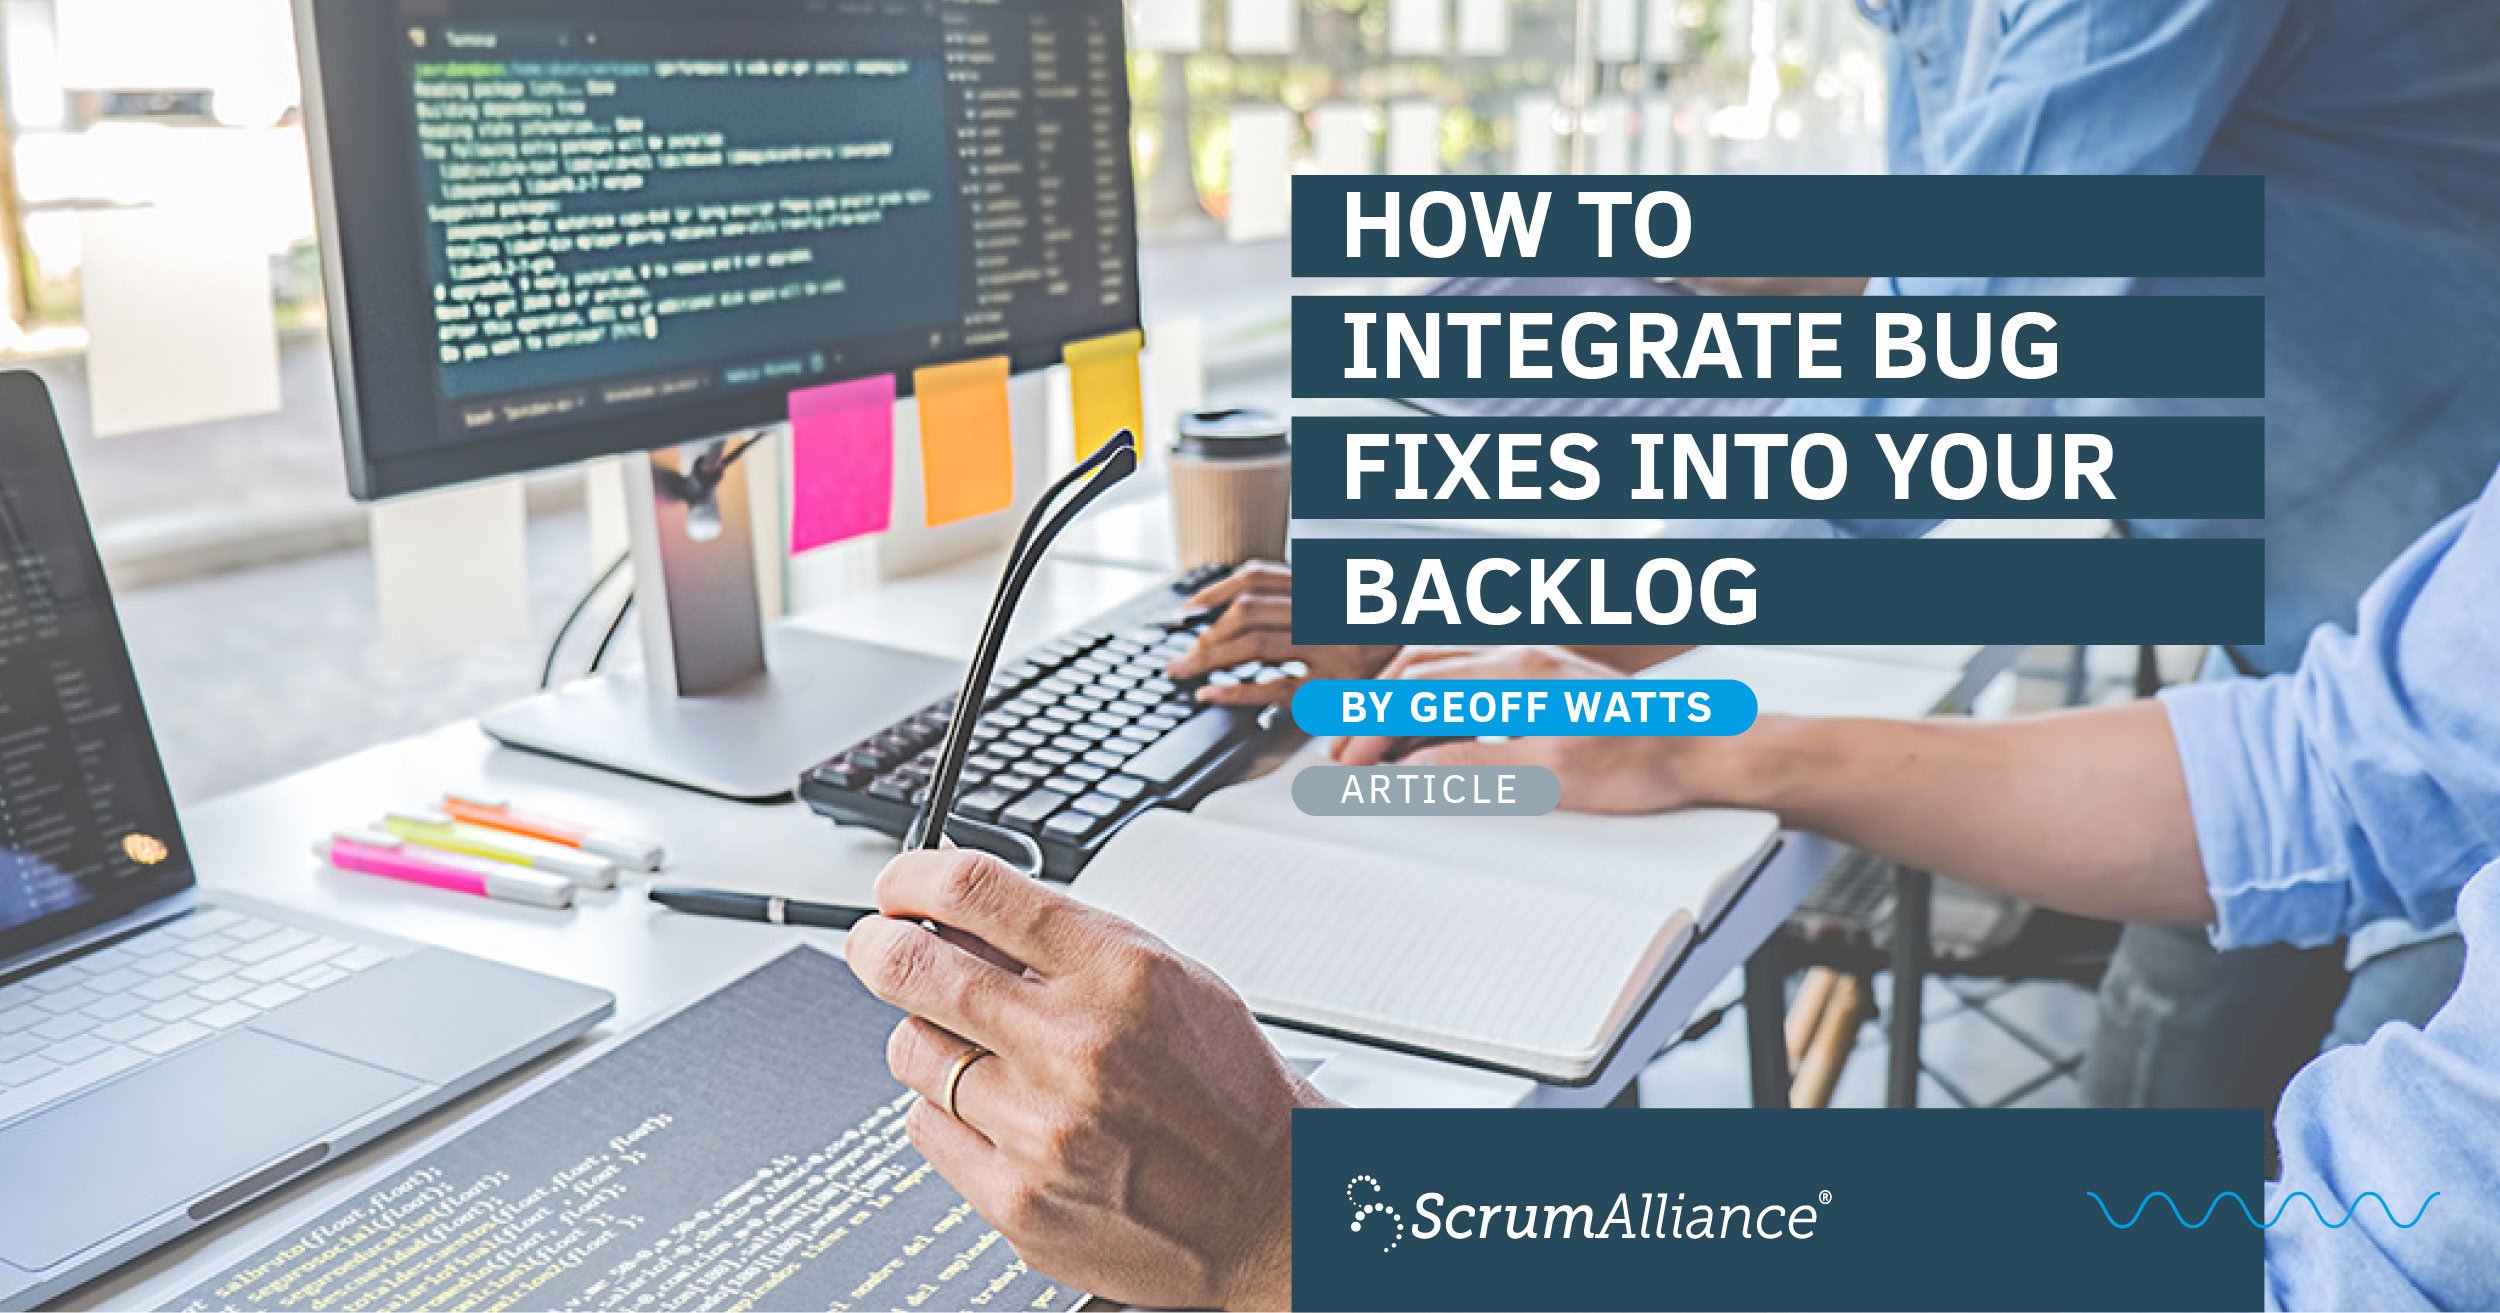 Article - How to Integrate Bug Fixes into Your Backlog